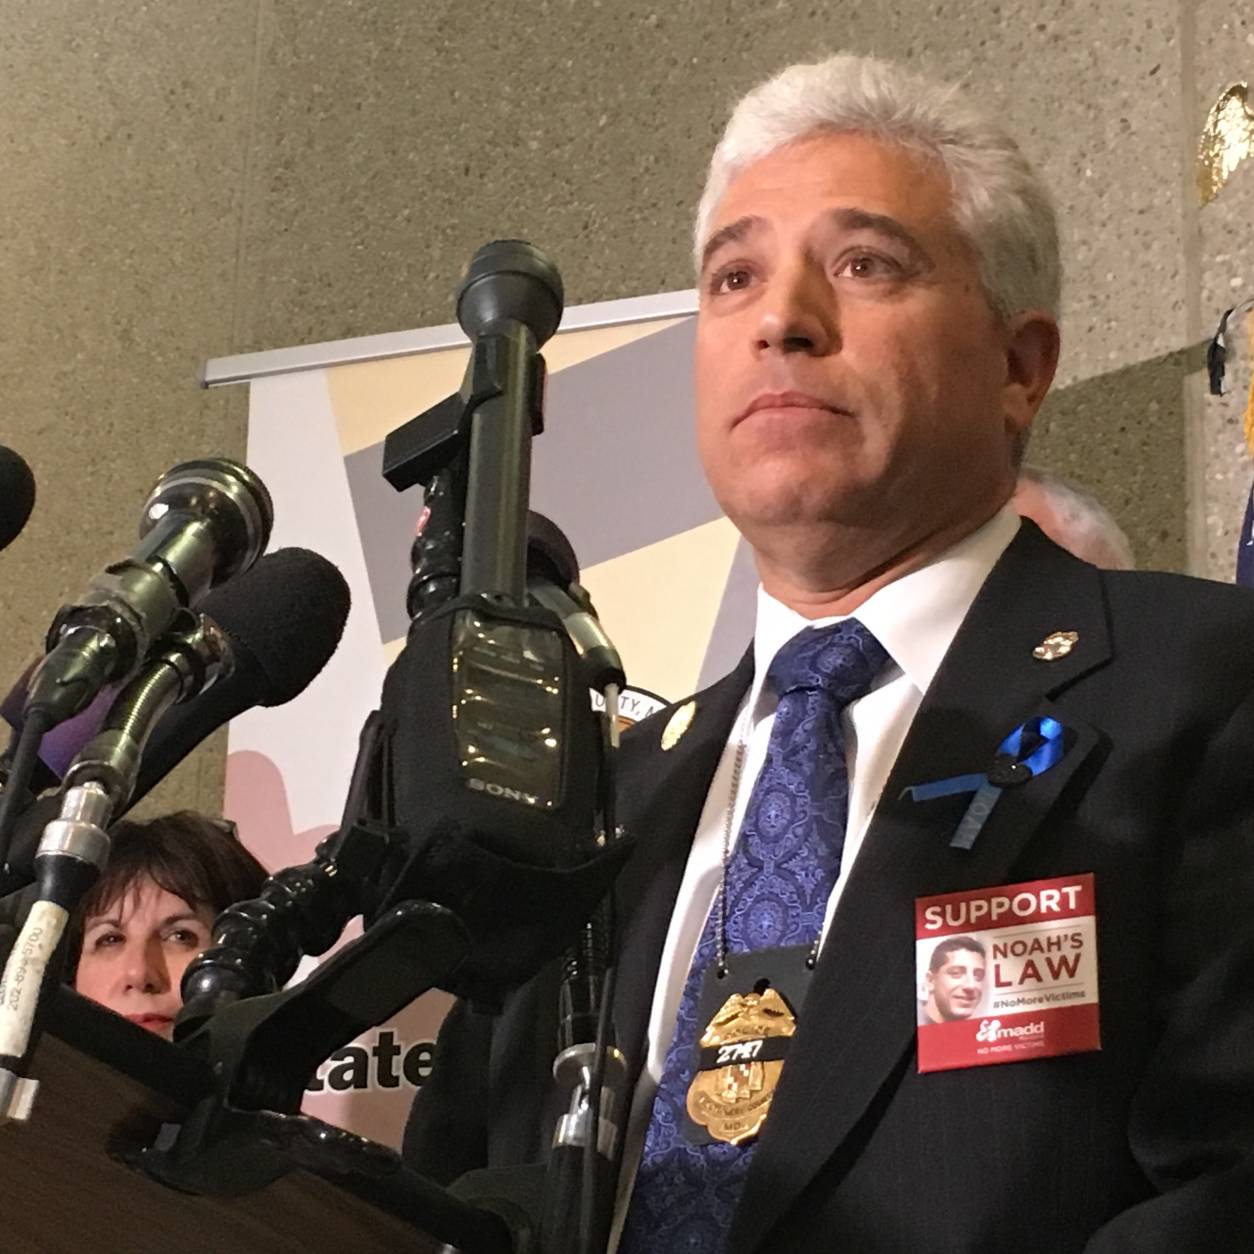 Noah Leotta's dad, Rich speaks Thursday. His wife, Marcia can be seen obstructed by microphones. (WTOP/Kate Ryan)